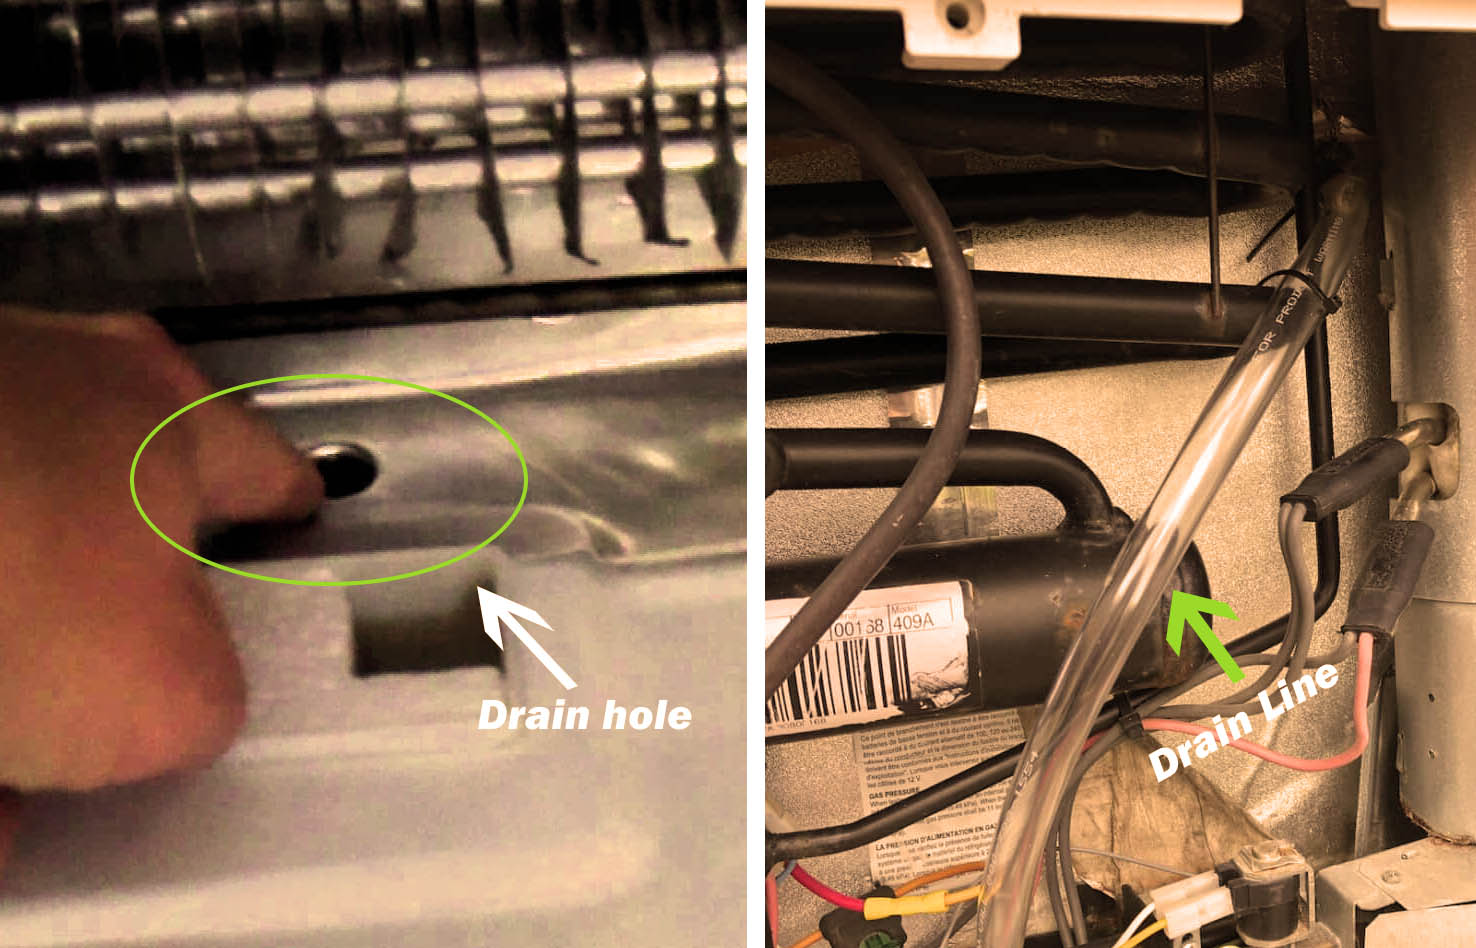 image of a drain hole and drain line in a fridge